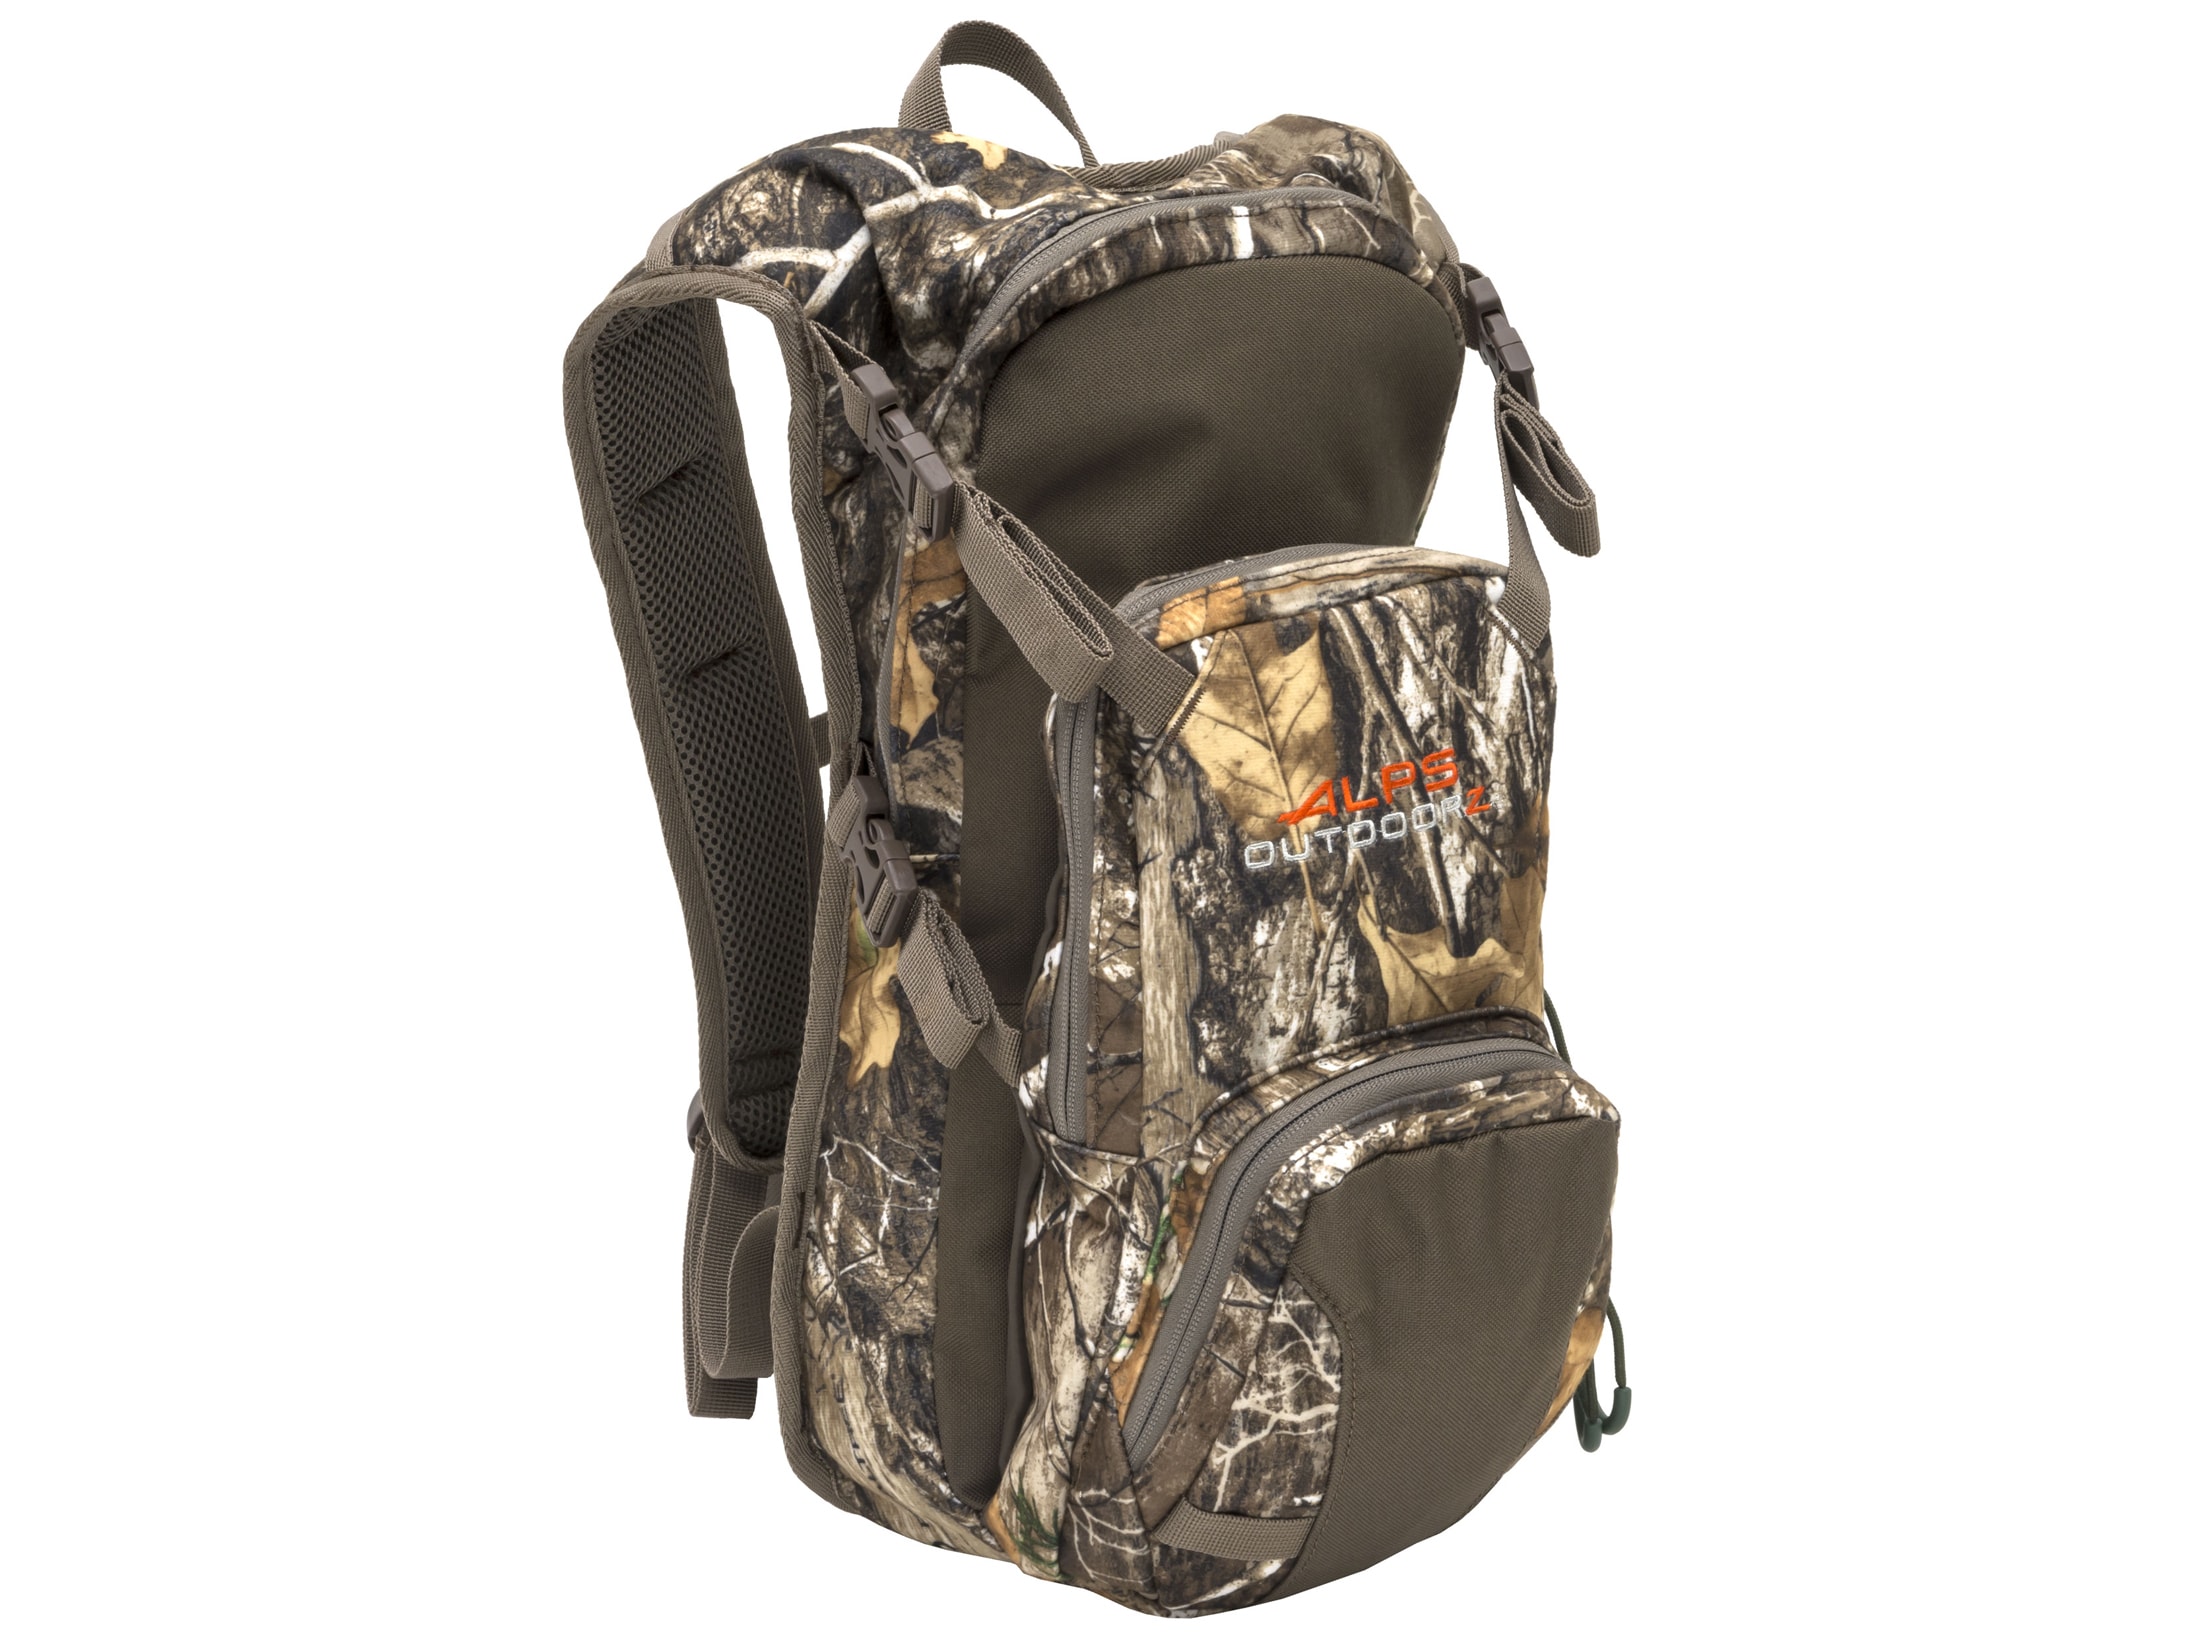 Mossy Oak Country Outdoor Hunting Bag w/ Hydration Pocket & Gun or Bow Pocket